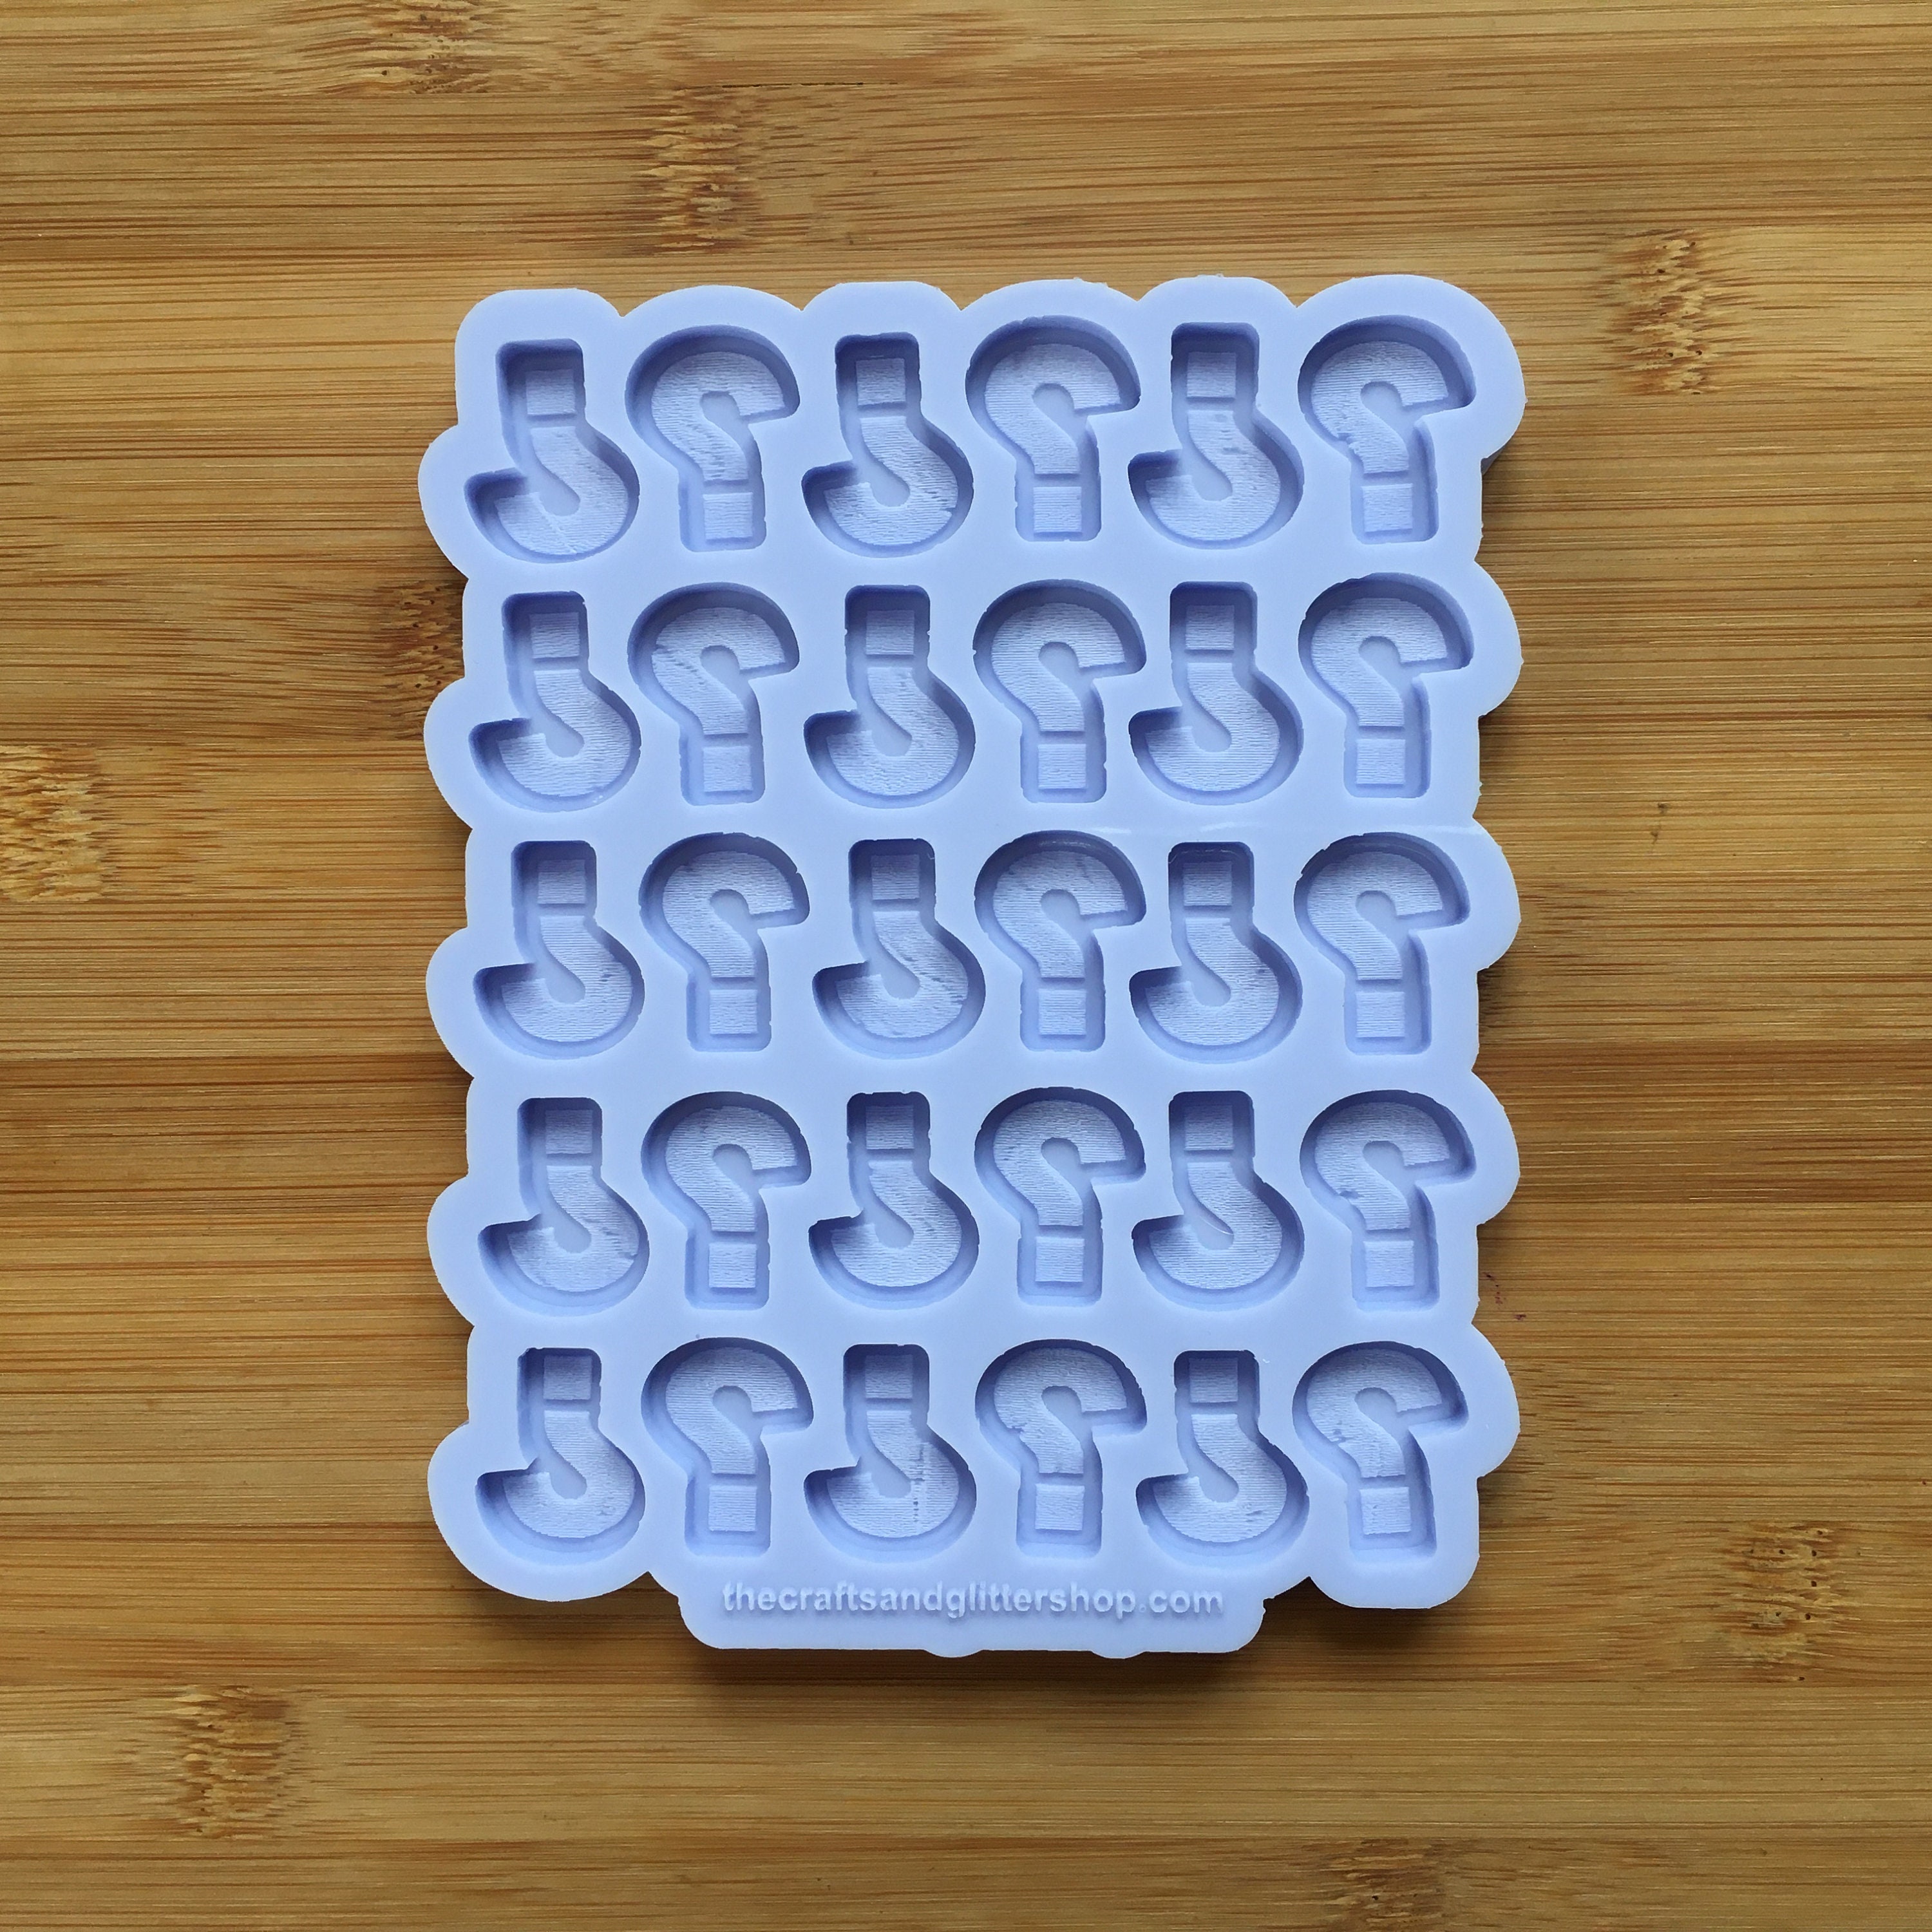 Wax Melt Molds 6 Cavity Clear Plastic Clamshell Mould Cube Tray